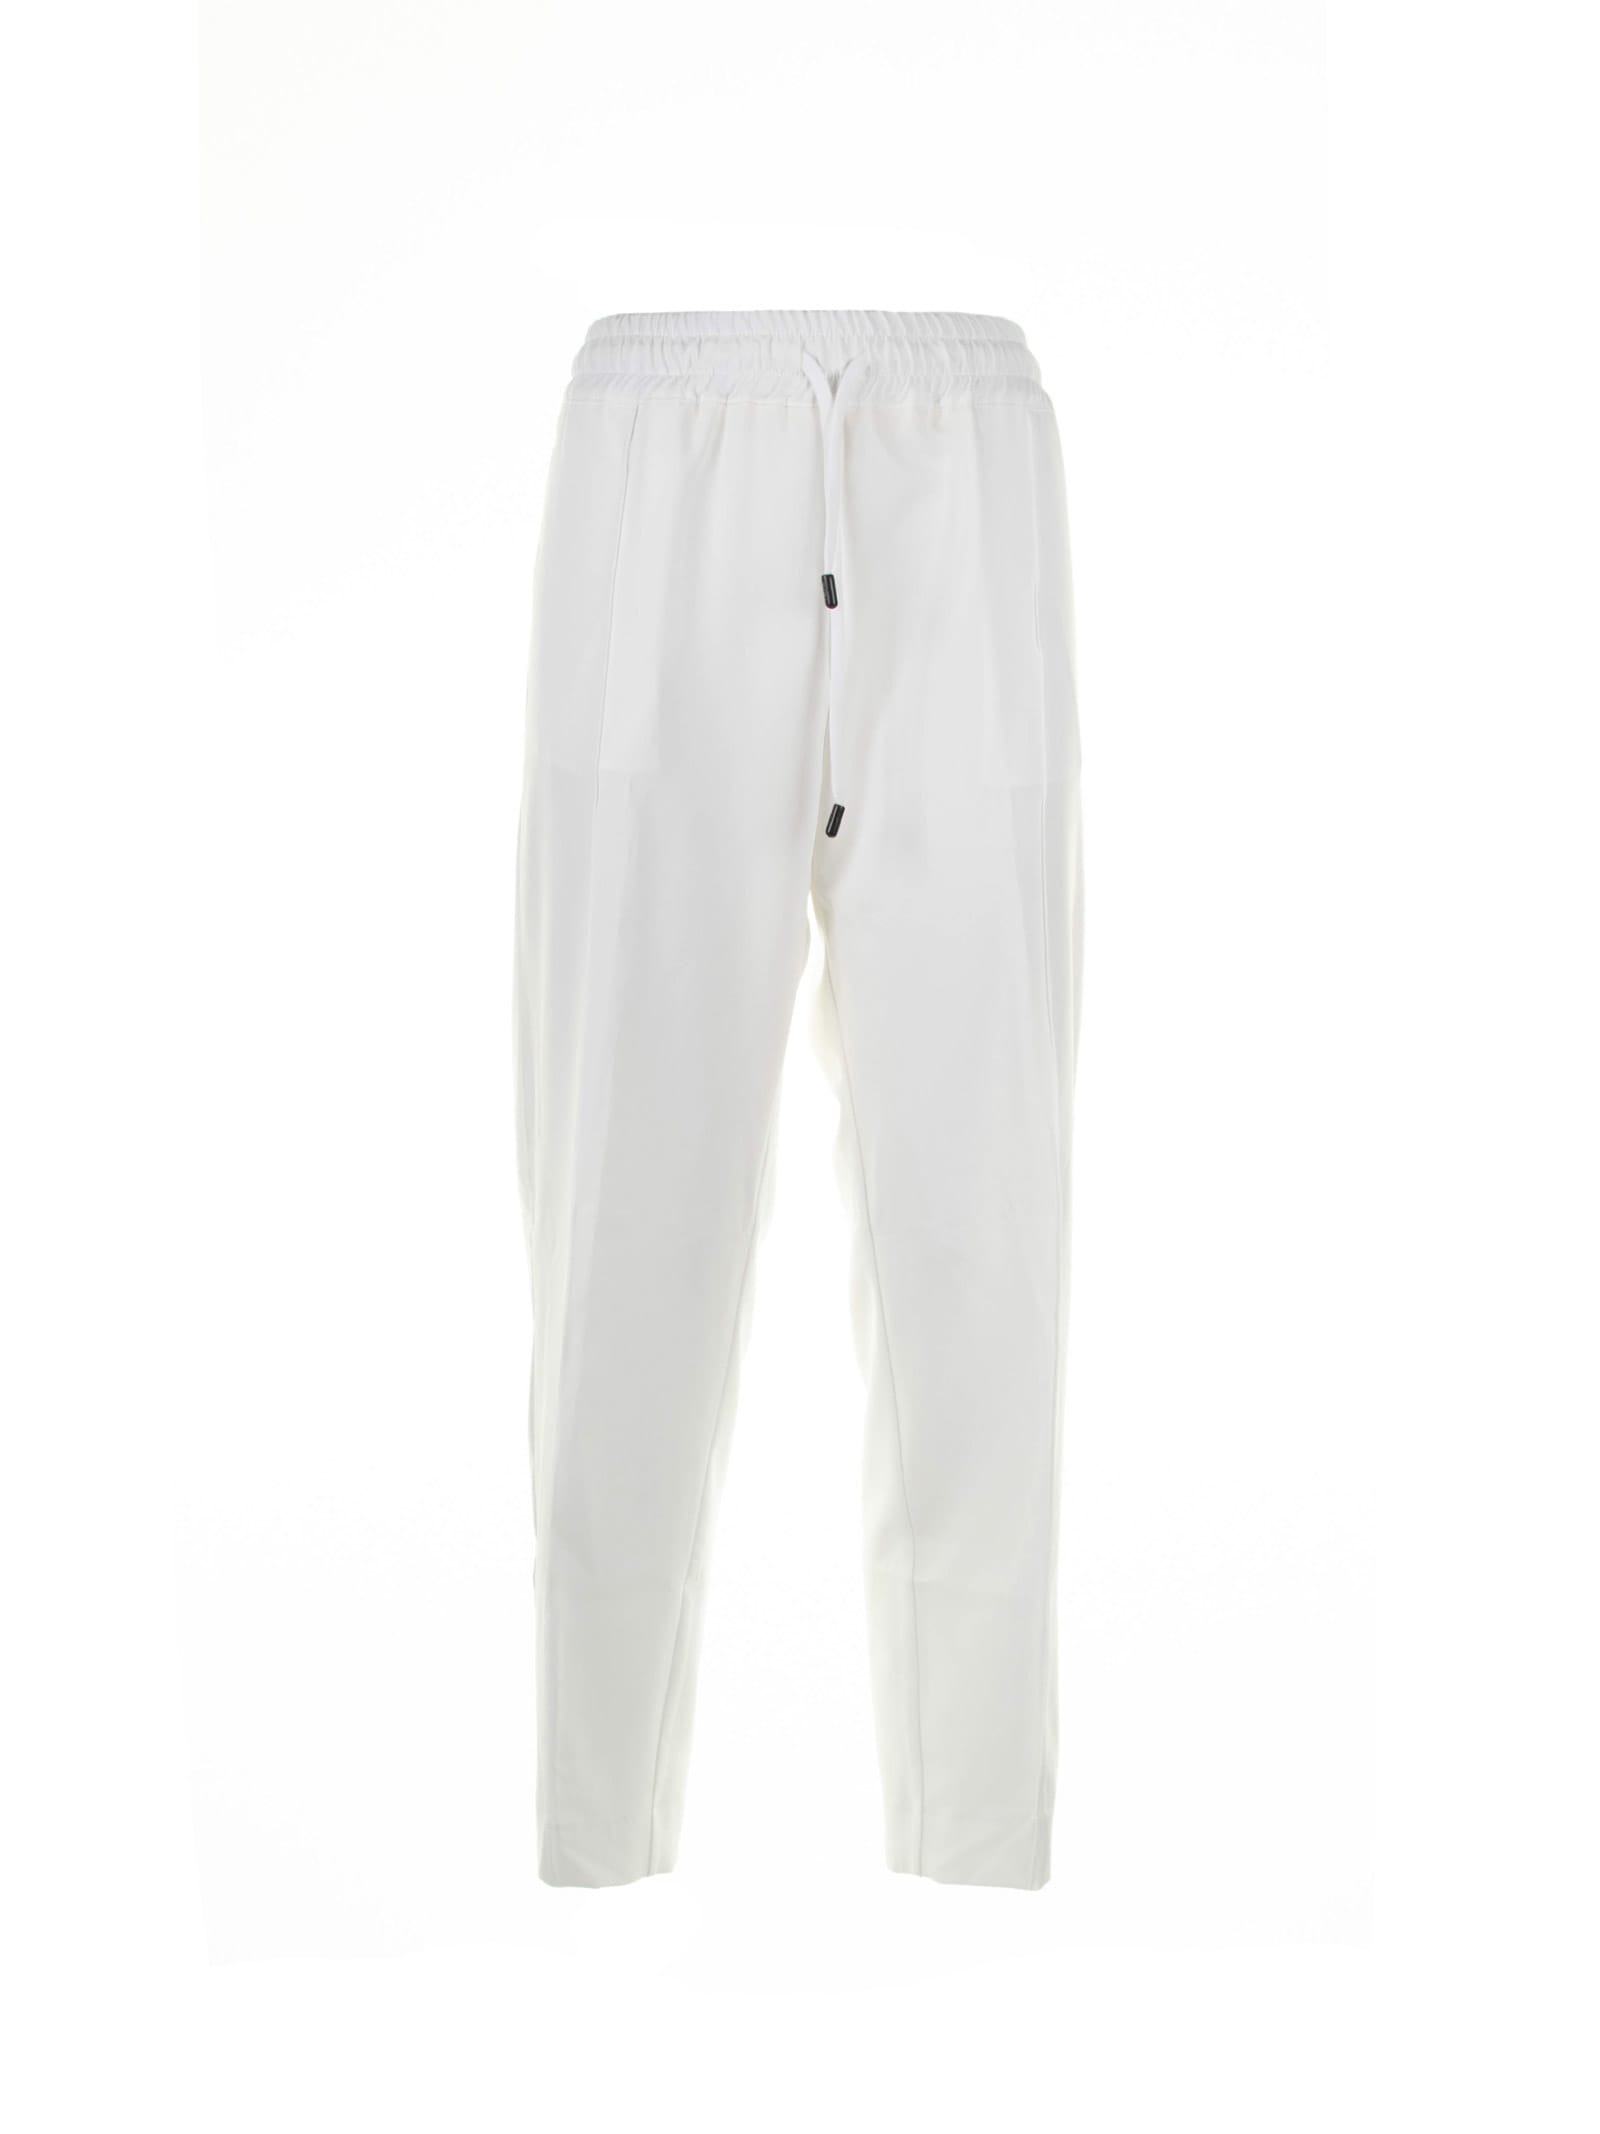 White Womens Trousers With Drawstring